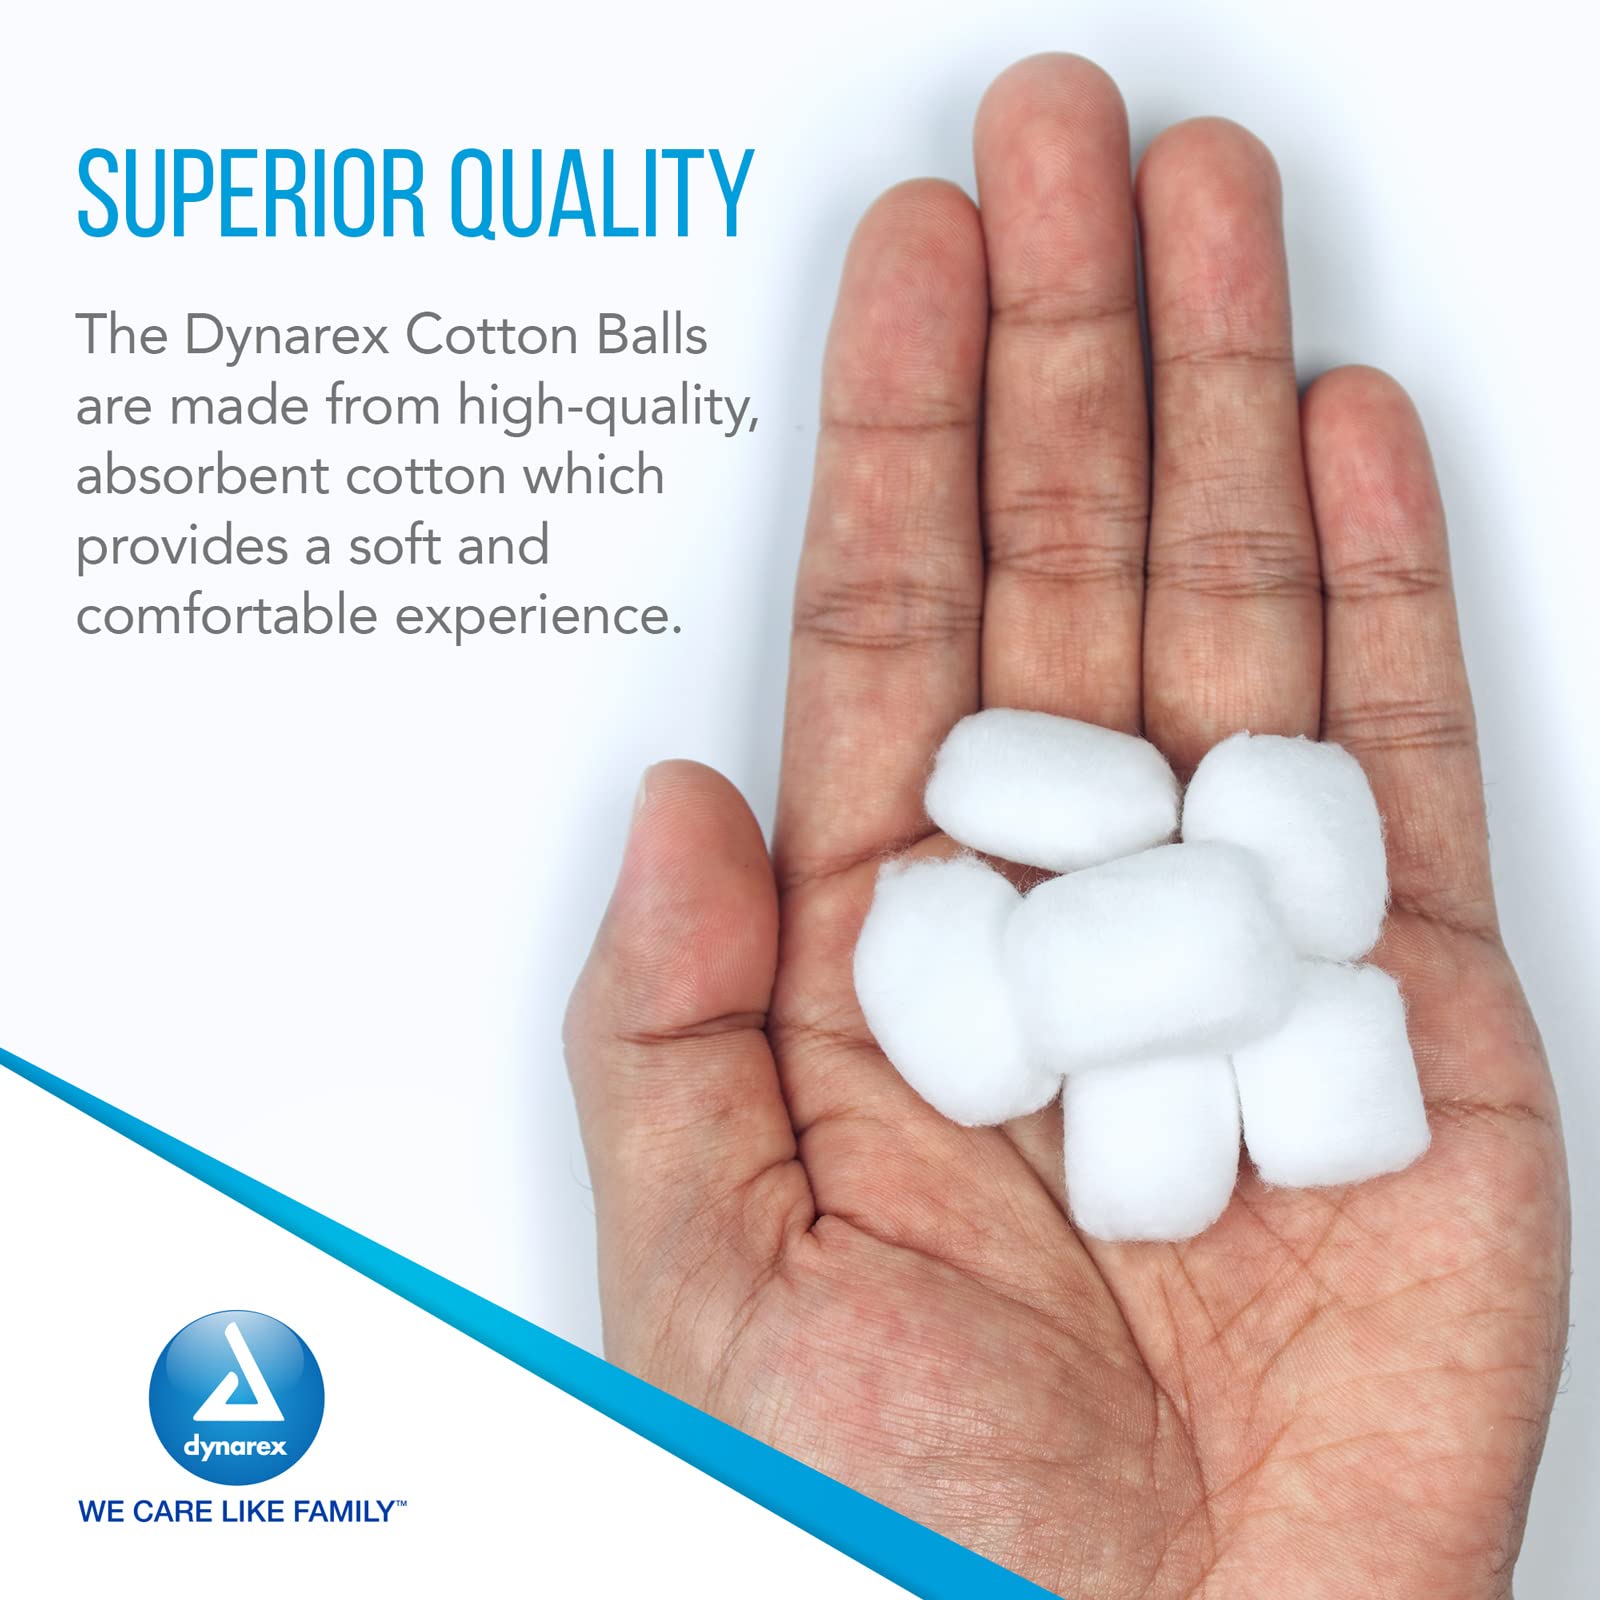 Dynarex Cotton Balls, Non-Sterile and Large Sized, Latex-Free and Absorbent, For Skin Cleansing, Crafts, & as Makeup Remover, Ships as 1 Bag of 1000 Cotton Balls, 1 Bag of 1000 Dynarex Cotton Balls